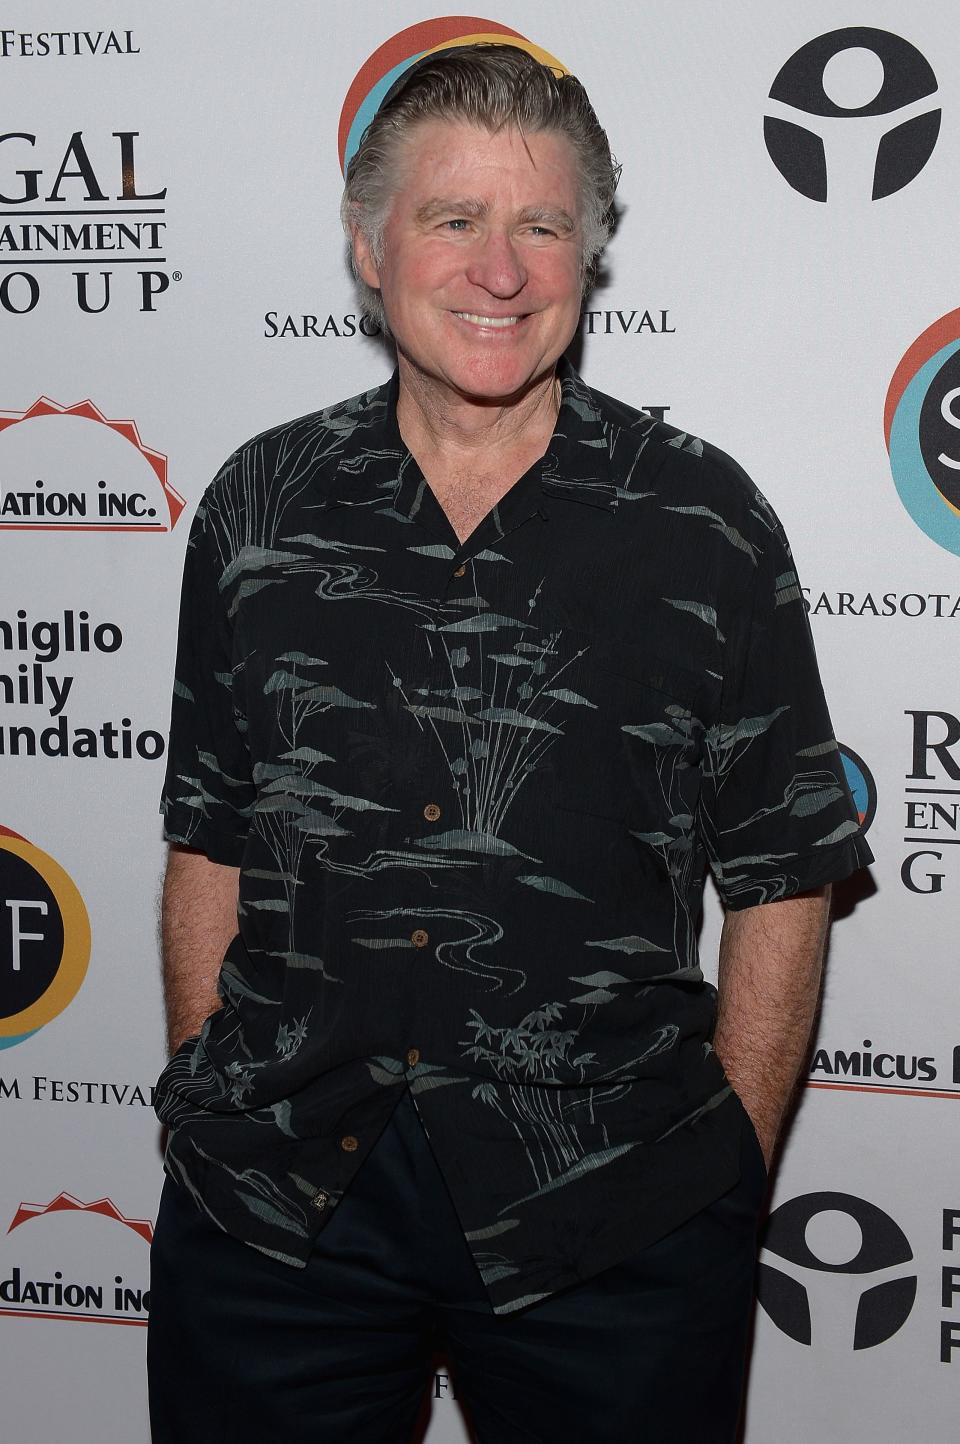 SARASOTA, FLORIDA - APRIL 08: Treat Williams attends the Cinema Tropicale Event on April 8, 2016 in Sarasota, Florida. (Photo by Gustavo Caballero/Getty Images for Sarasota Film Festival 2016) ORG XMIT: 626559165 ORIG FILE ID: 519935406